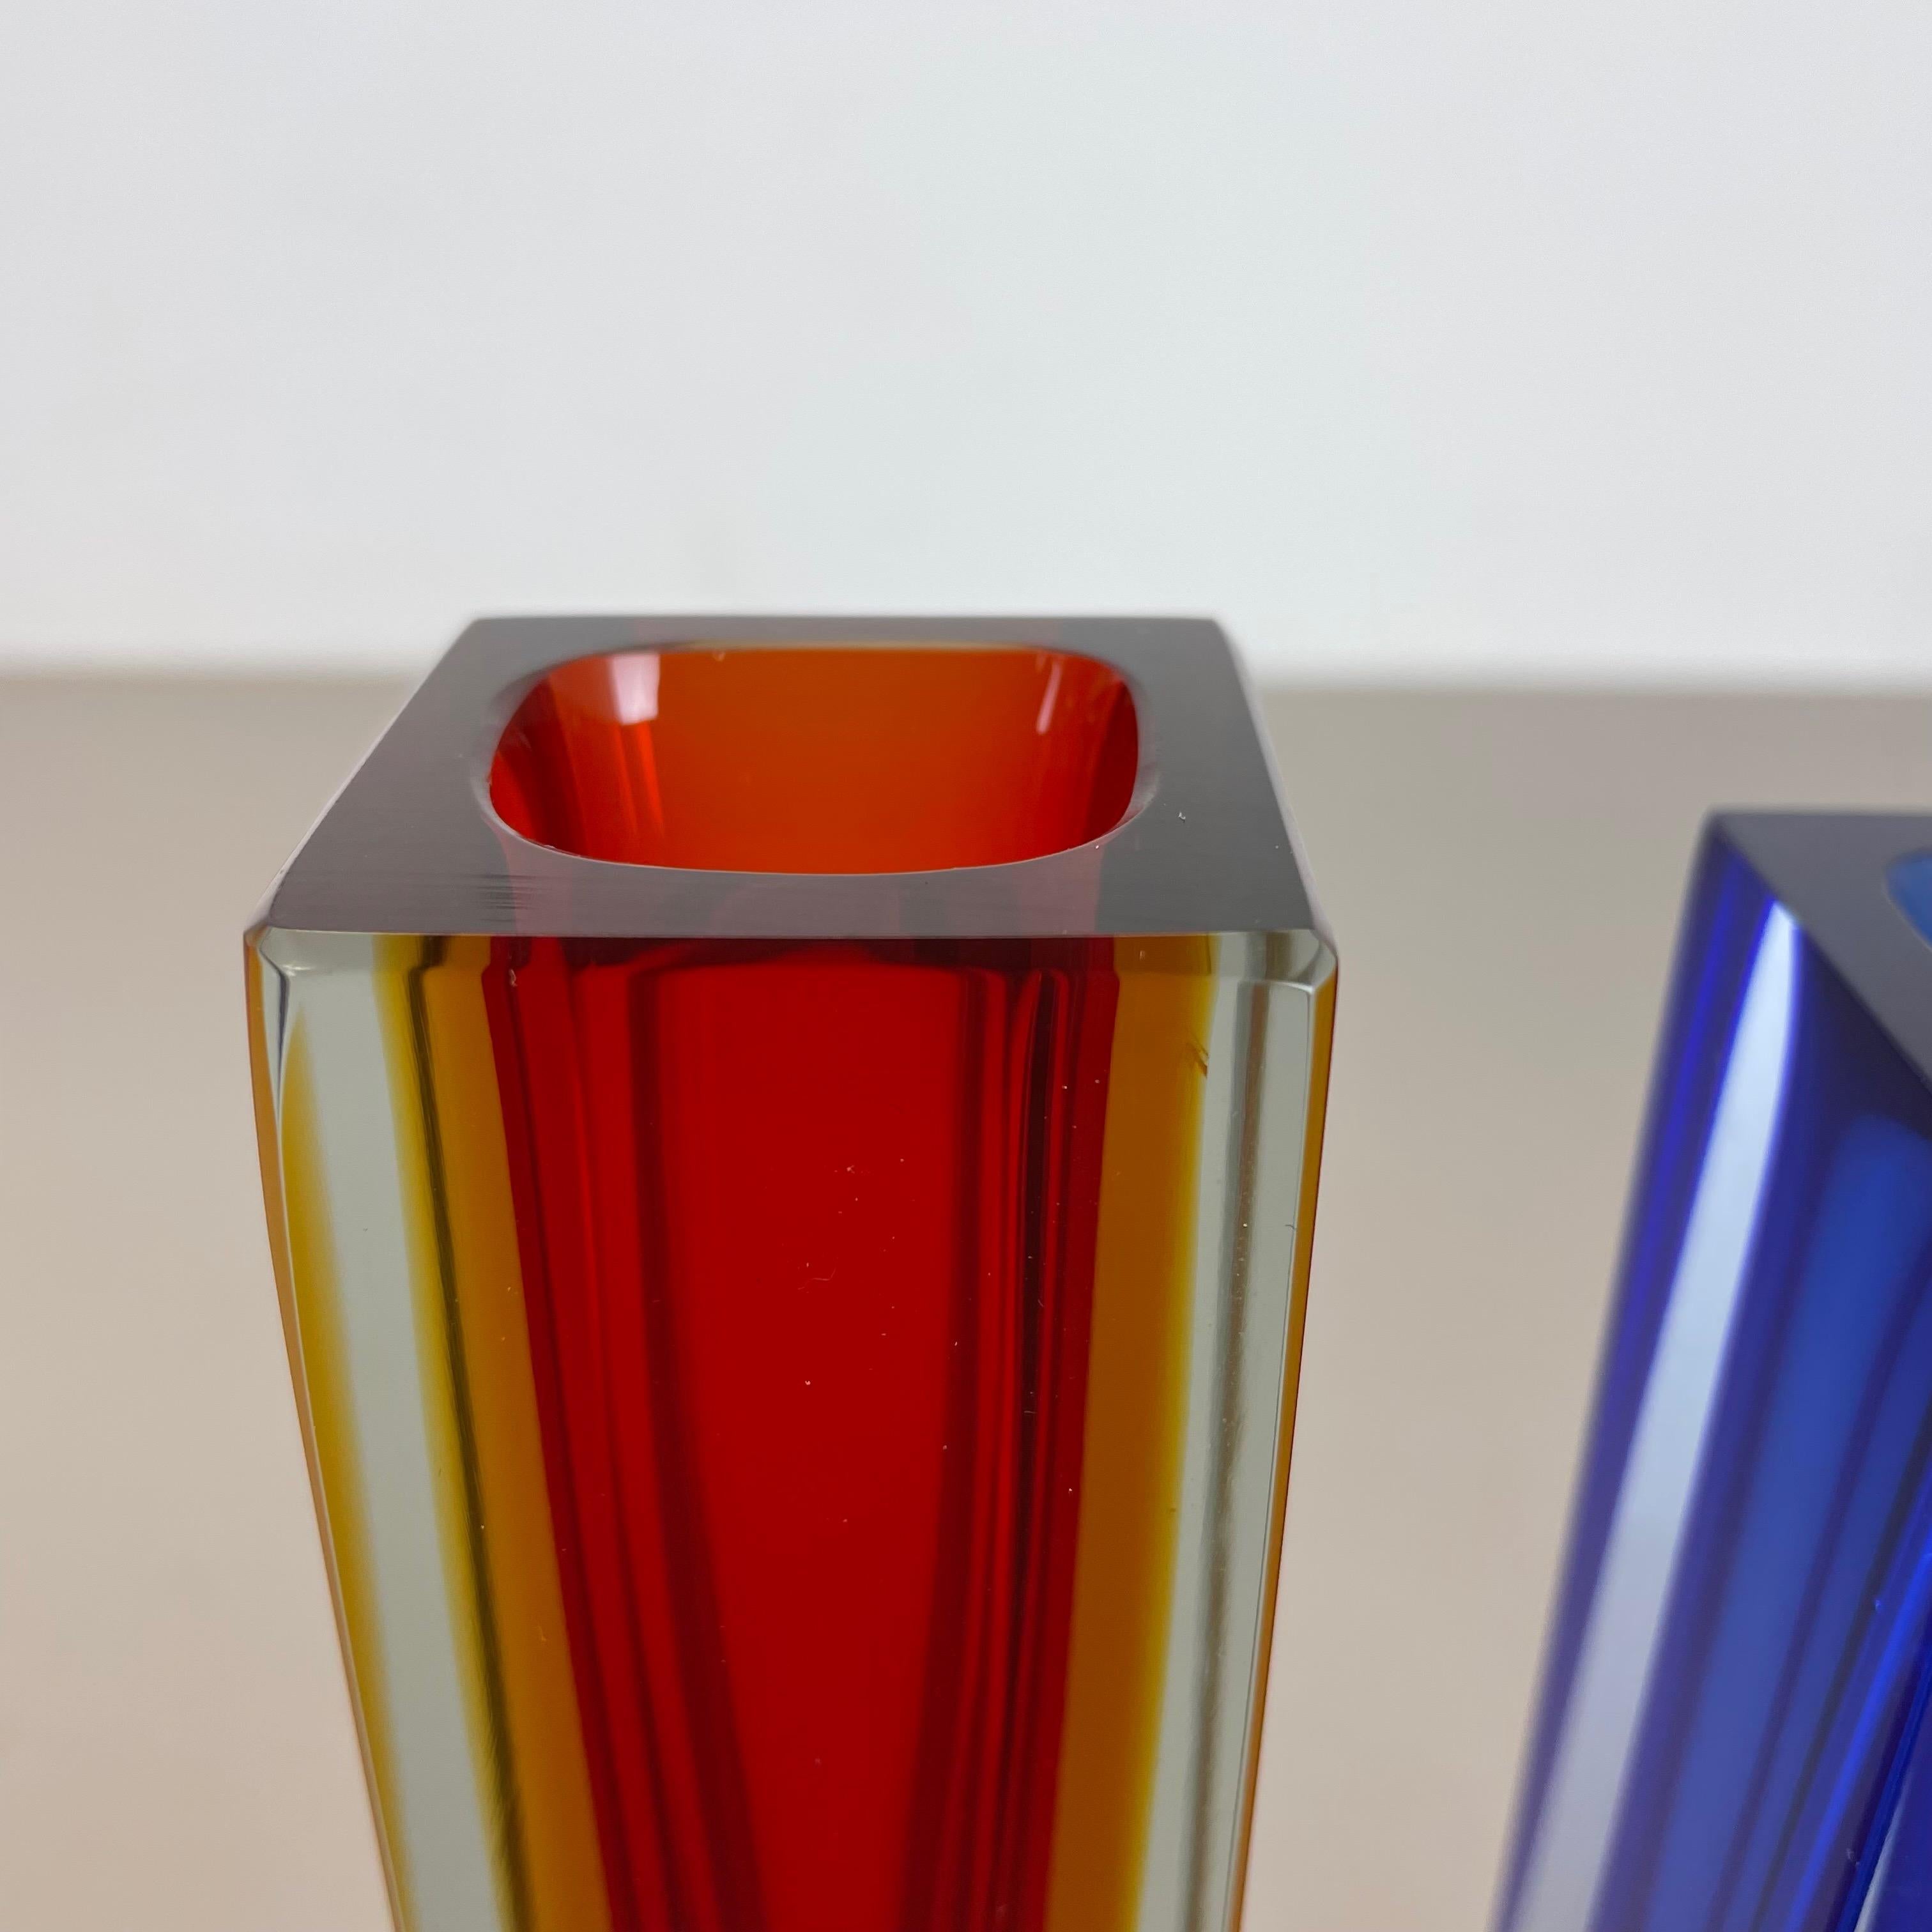 Rare Set of 3 Multicolor Faceted Murano Glass Sommerso Cube Vases, Italy, 1970s For Sale 4